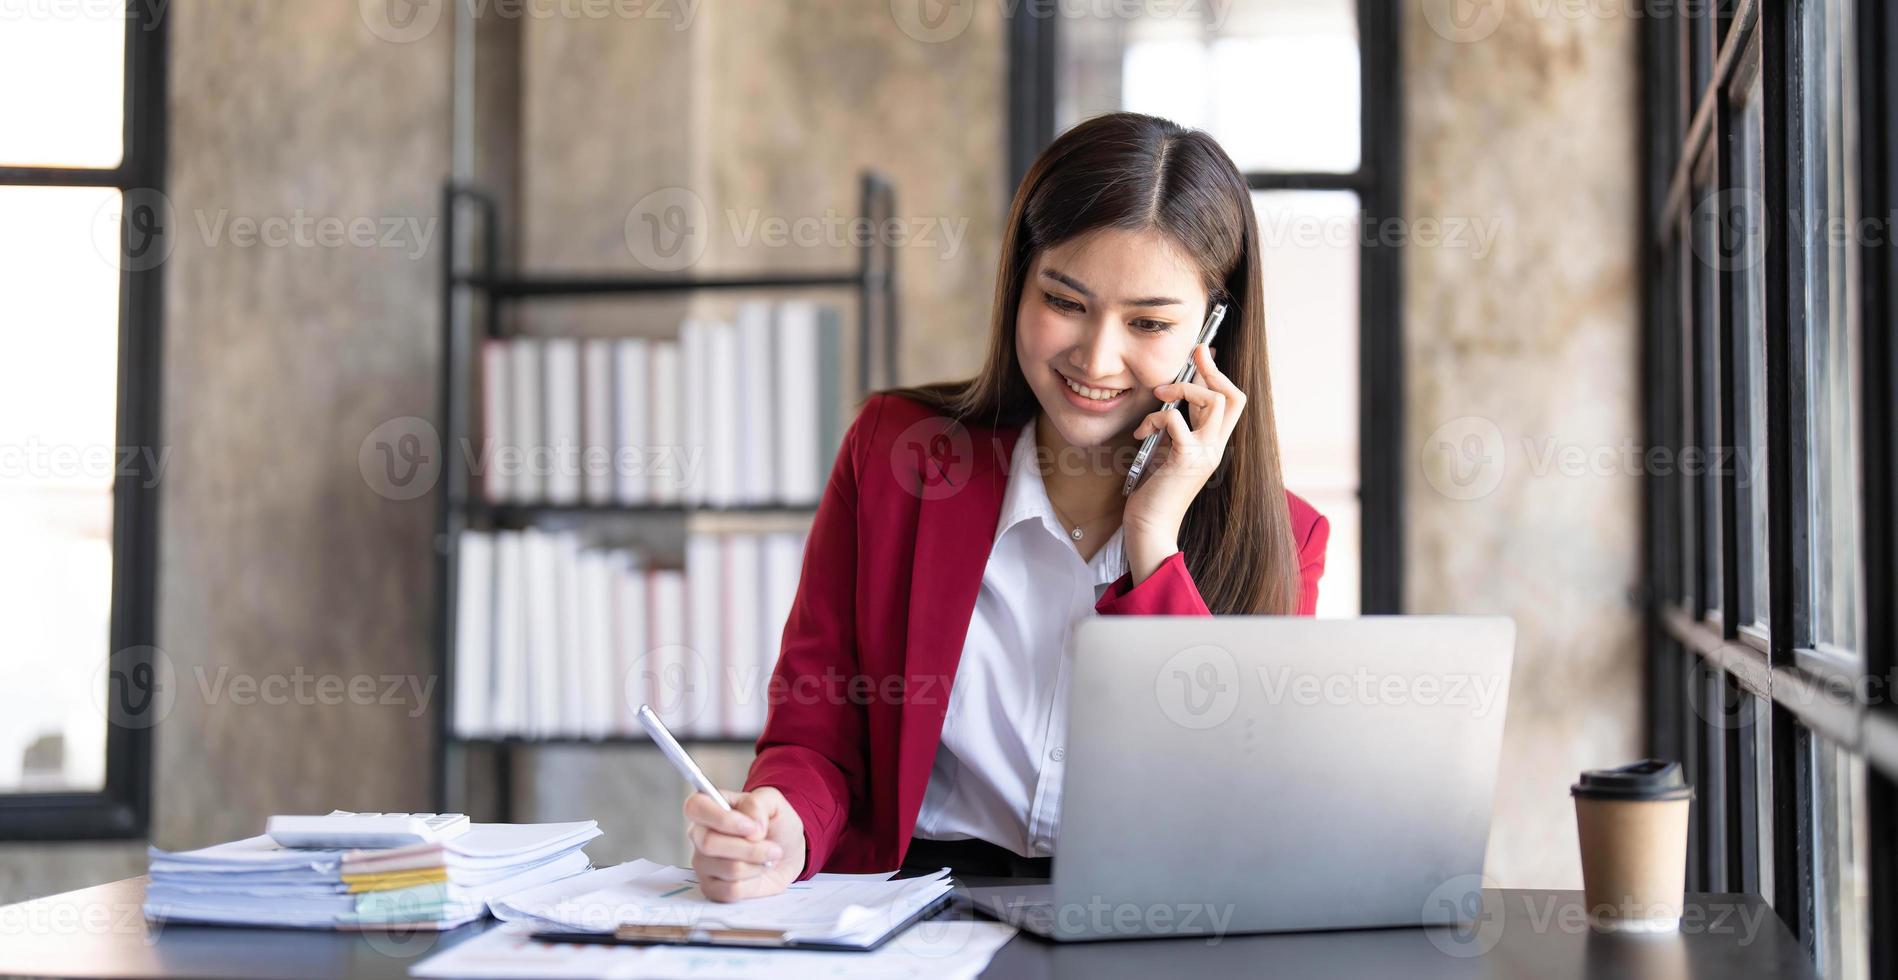 Portrait of a cheerful young business Asian woman using smartphone application in workplace office, concept of Small business employee freelance online sme marketing e-commerce telemarketing. photo